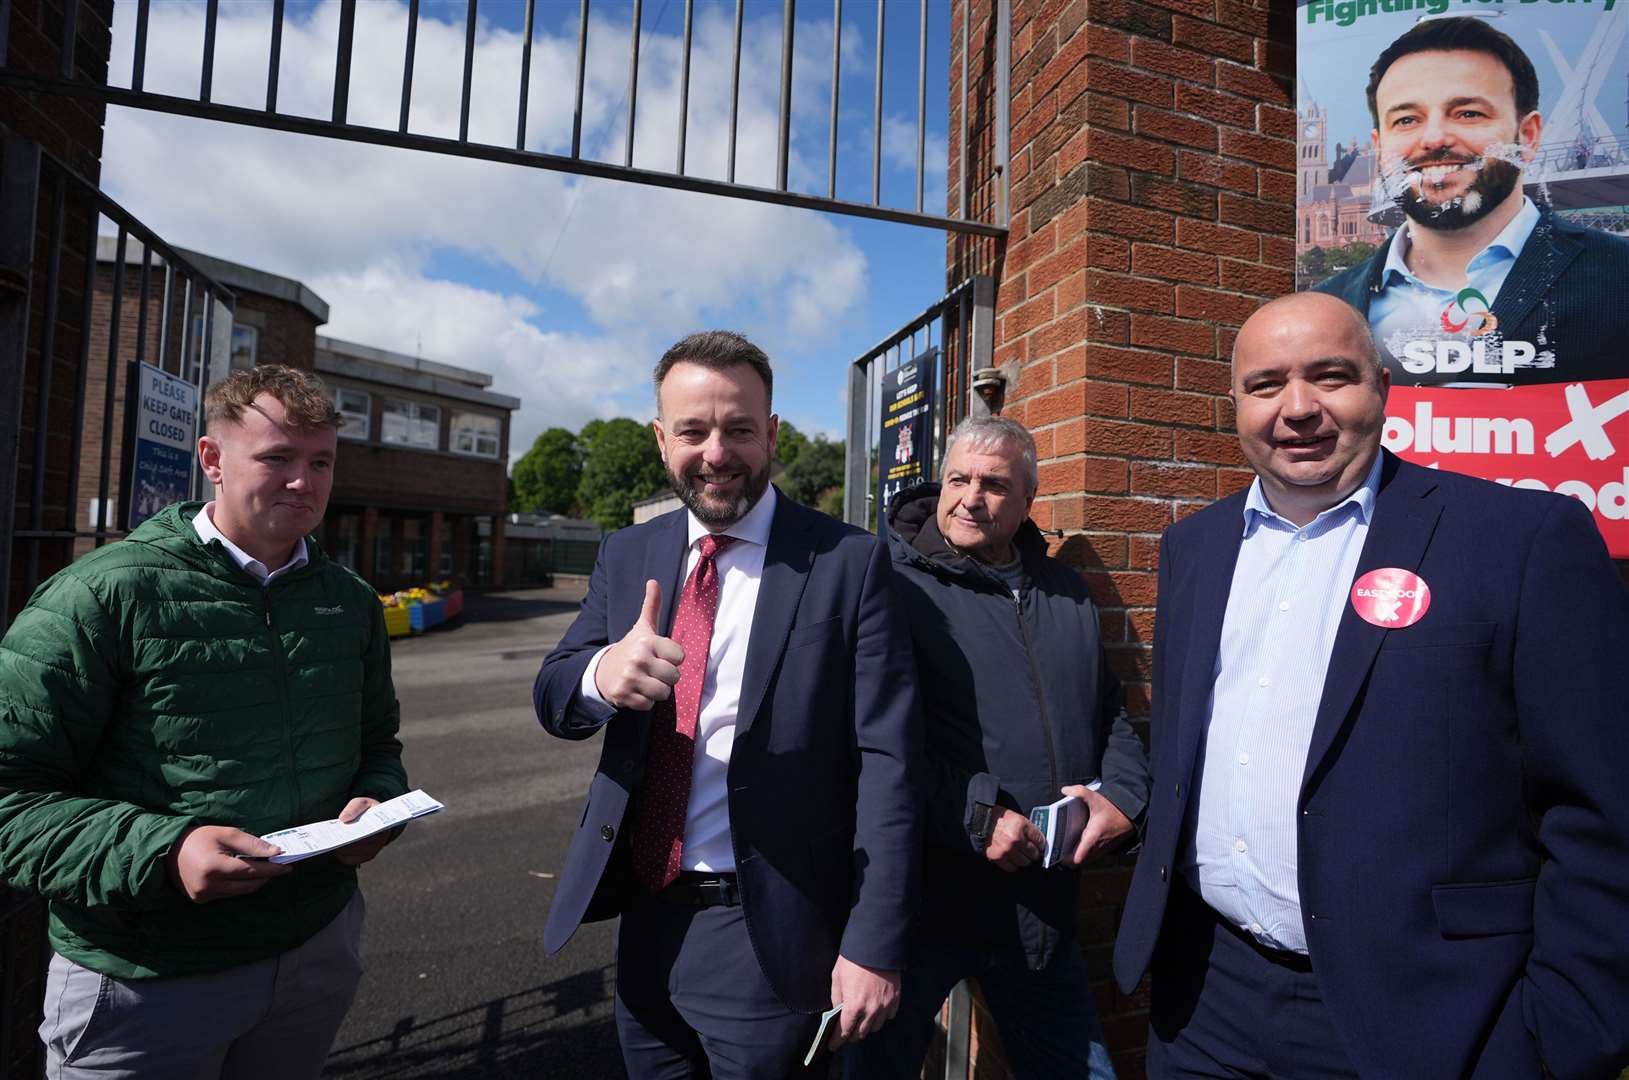 SDLP leader Colum Eastwood arrives to vote at the Model Primary School in Londonderry (Niall Carson/PA)